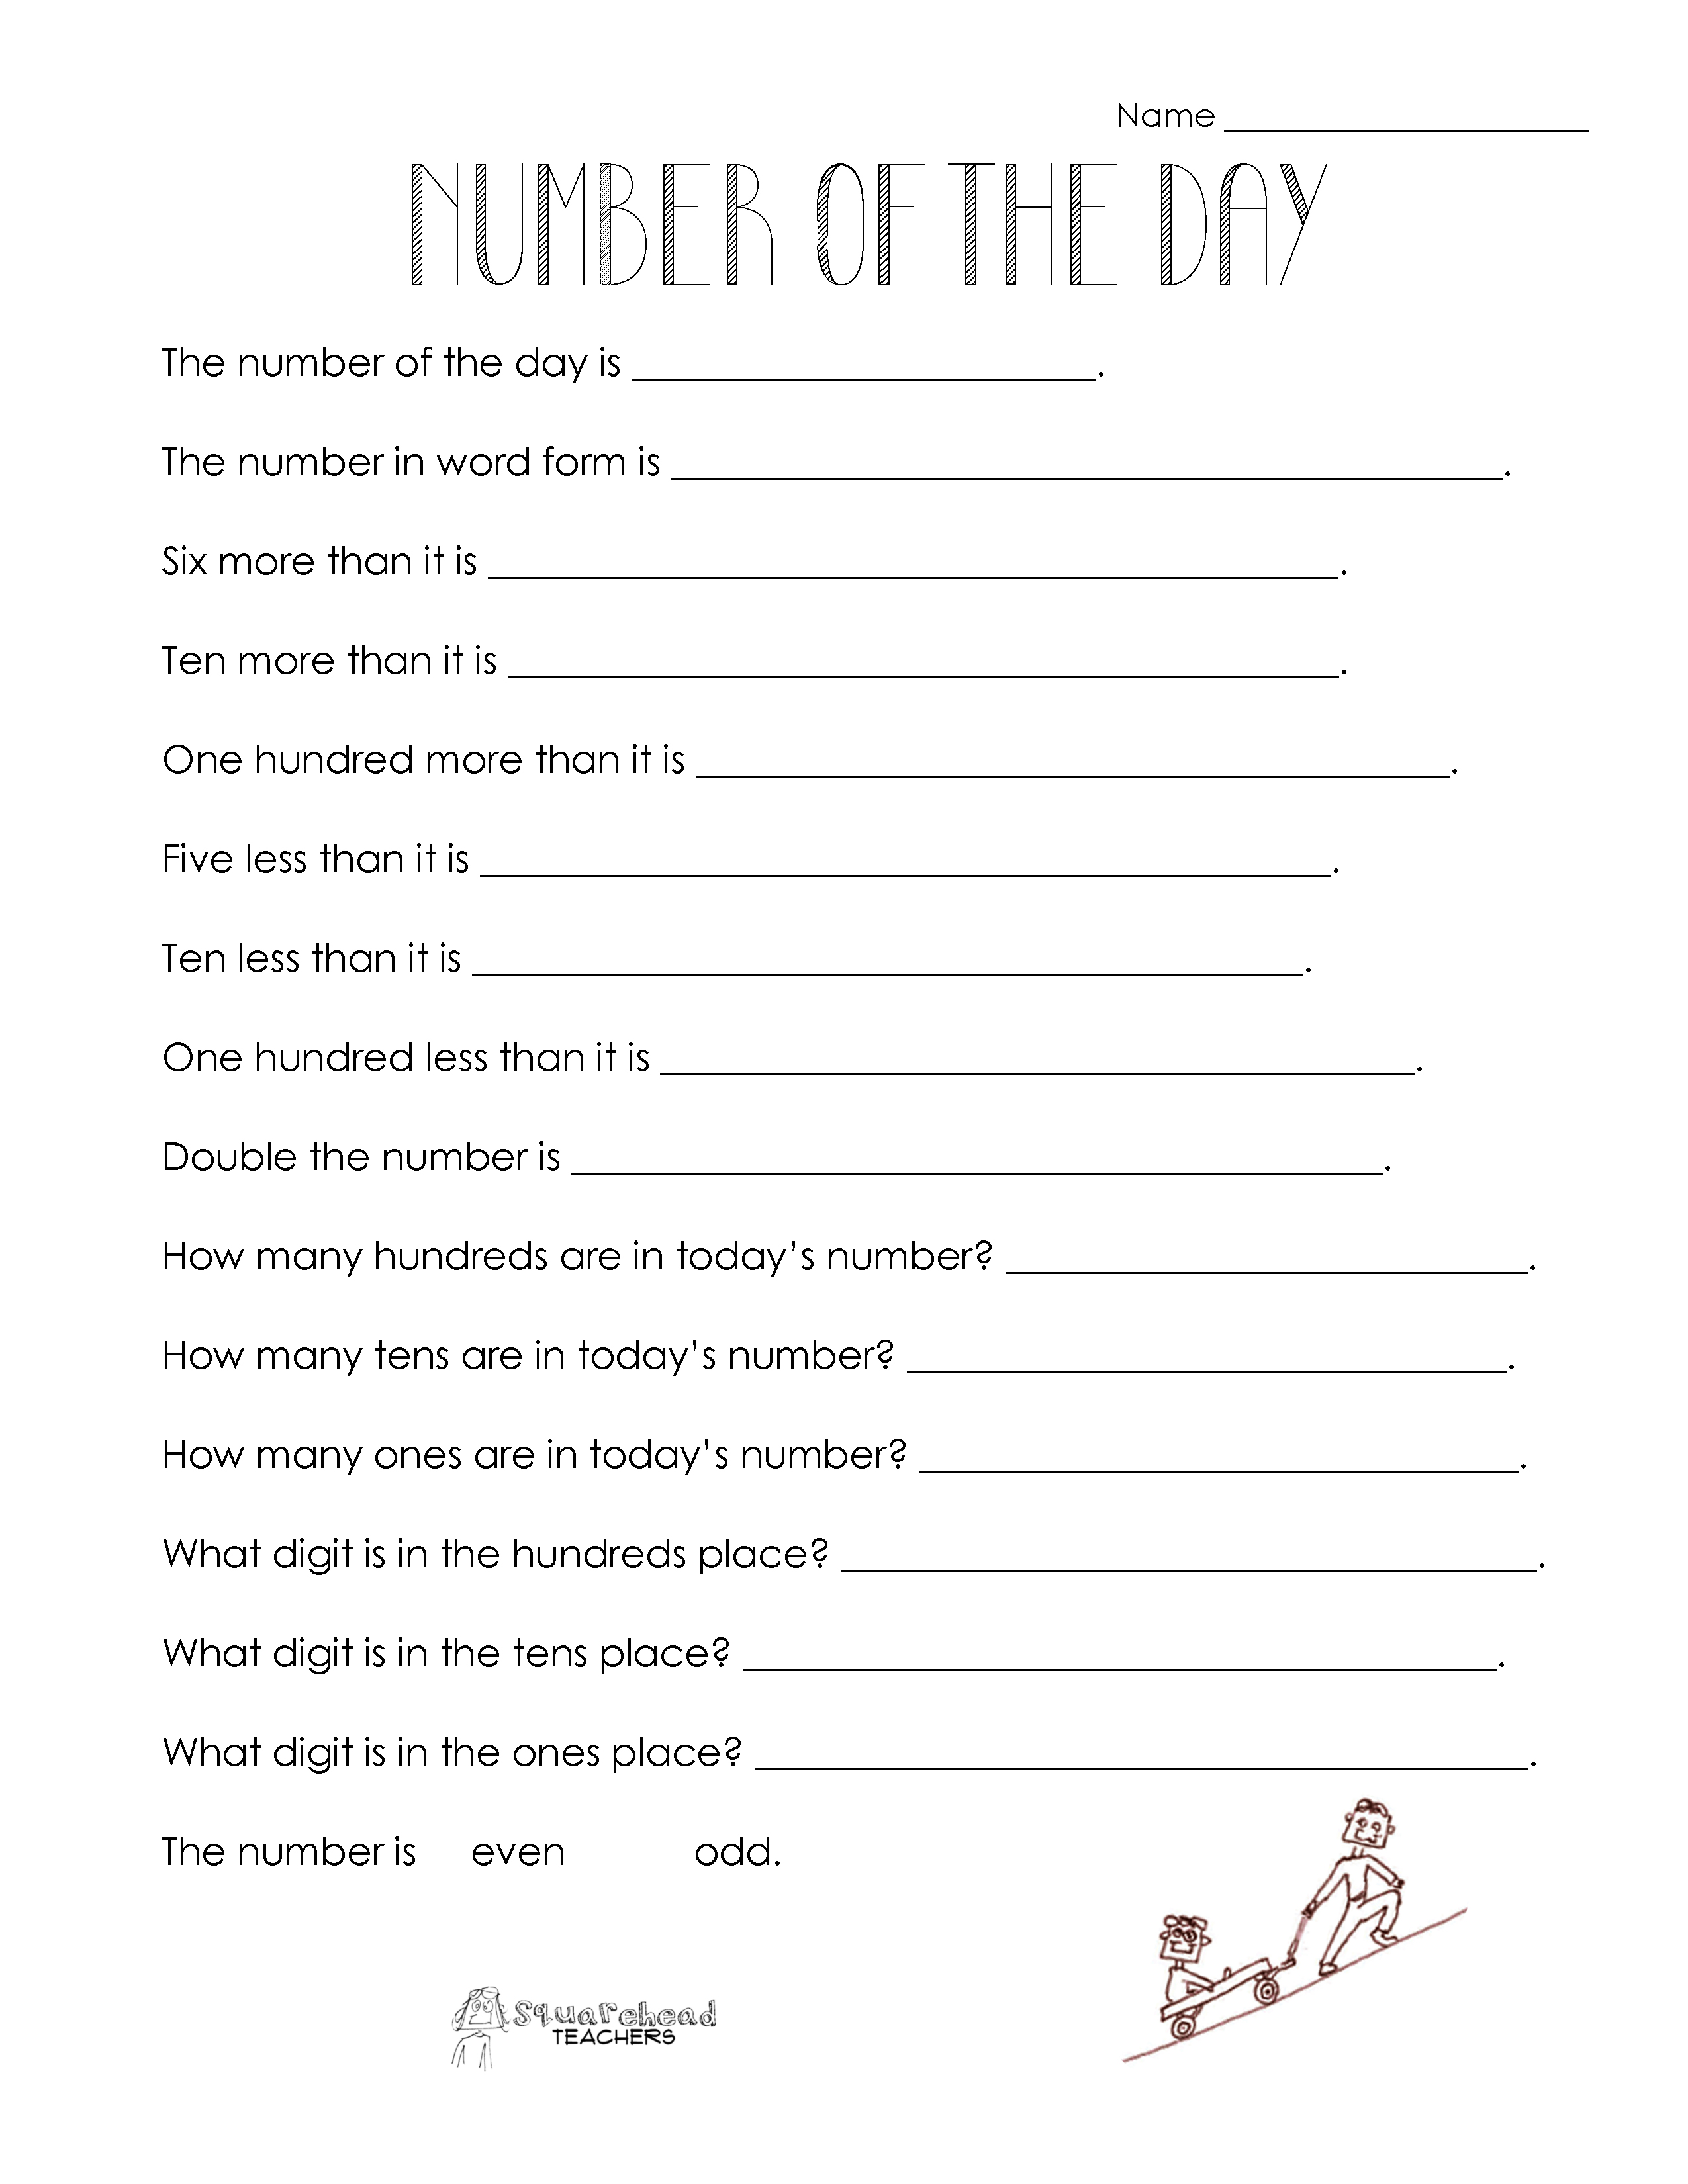 Day of the Number Worksheet 4th Grade Image